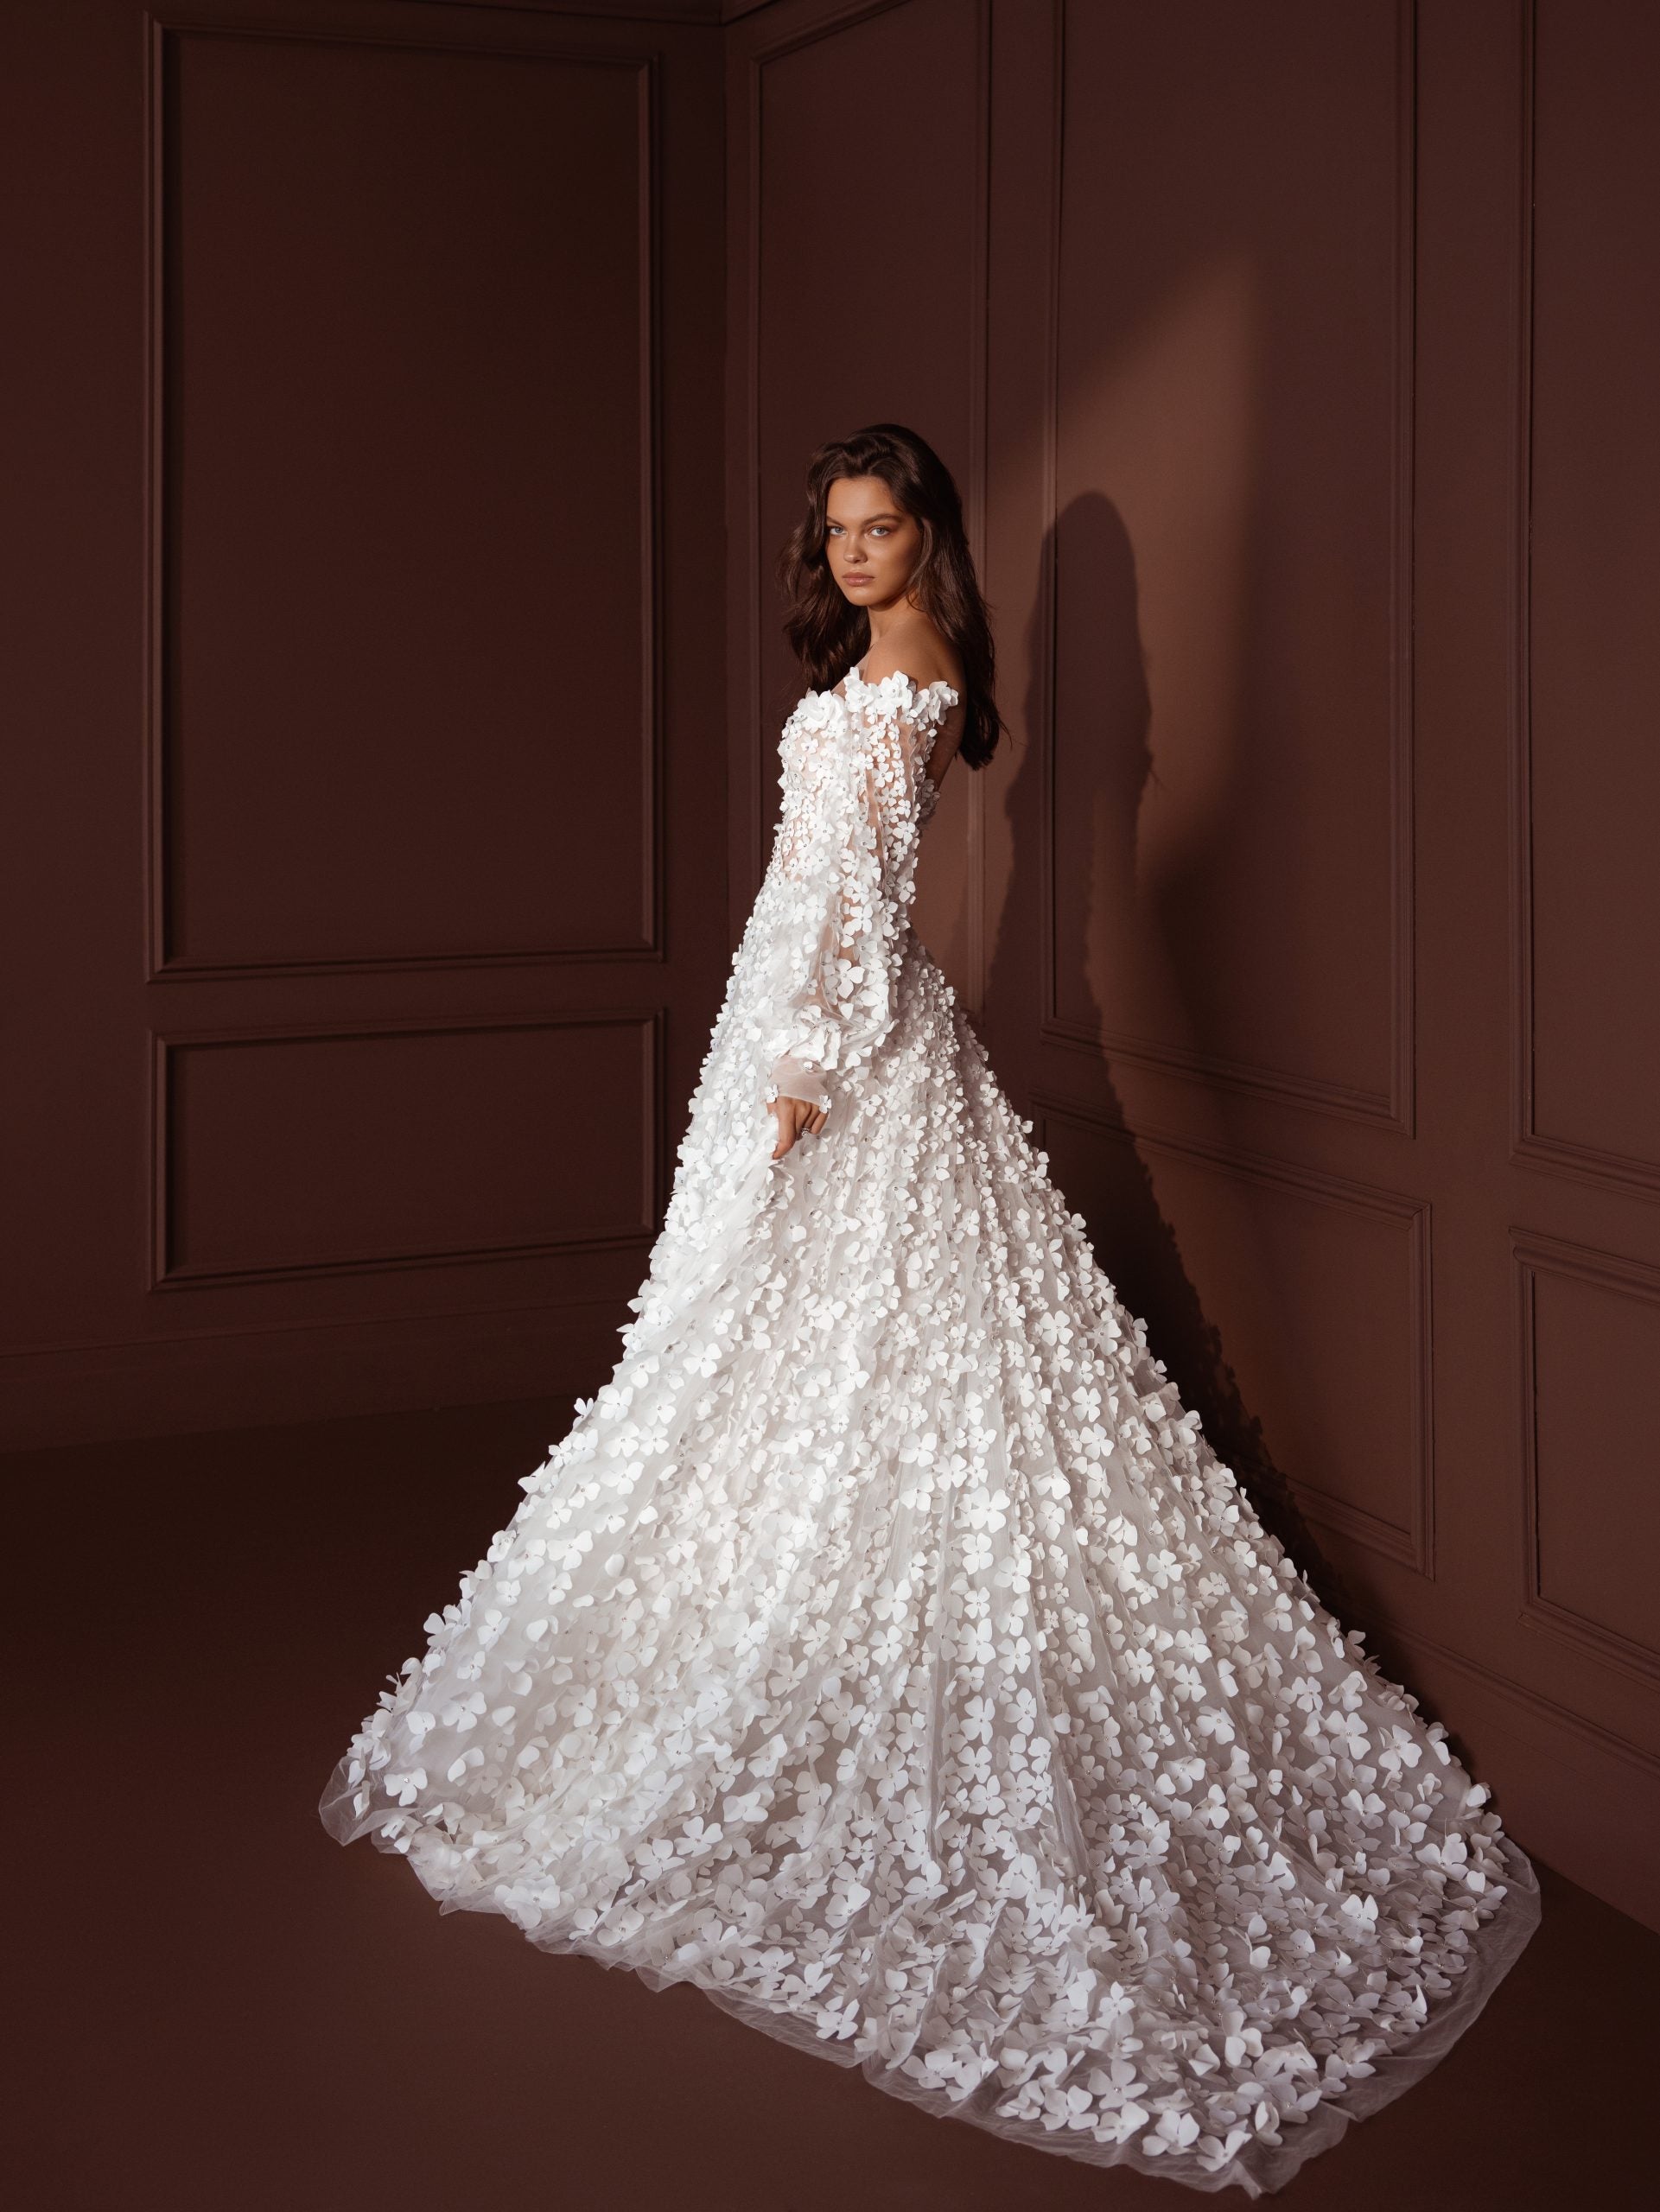 Laser Cut Flower A-Line Gown by Pnina Tornai - Image 2